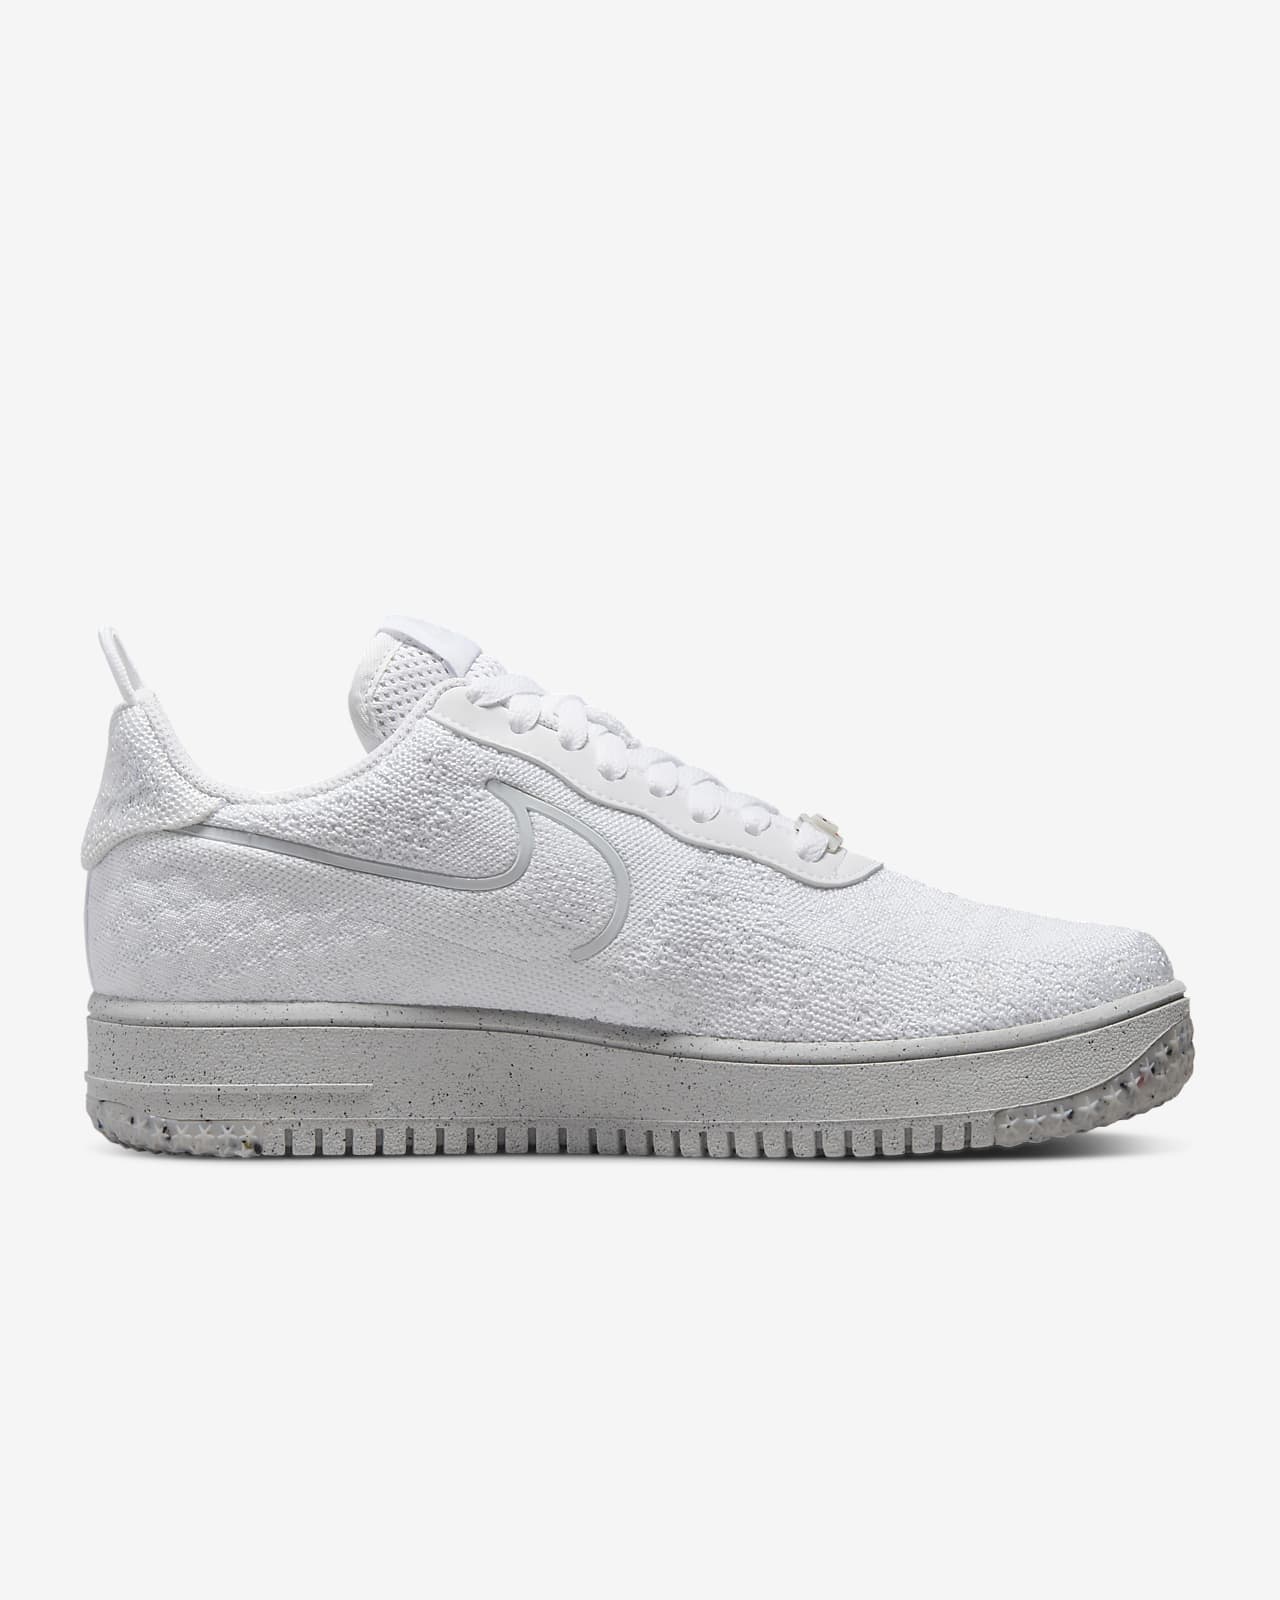 Nike Air Force 1 Crater Flyknit Next Nature Men's Shoes. Nike LU